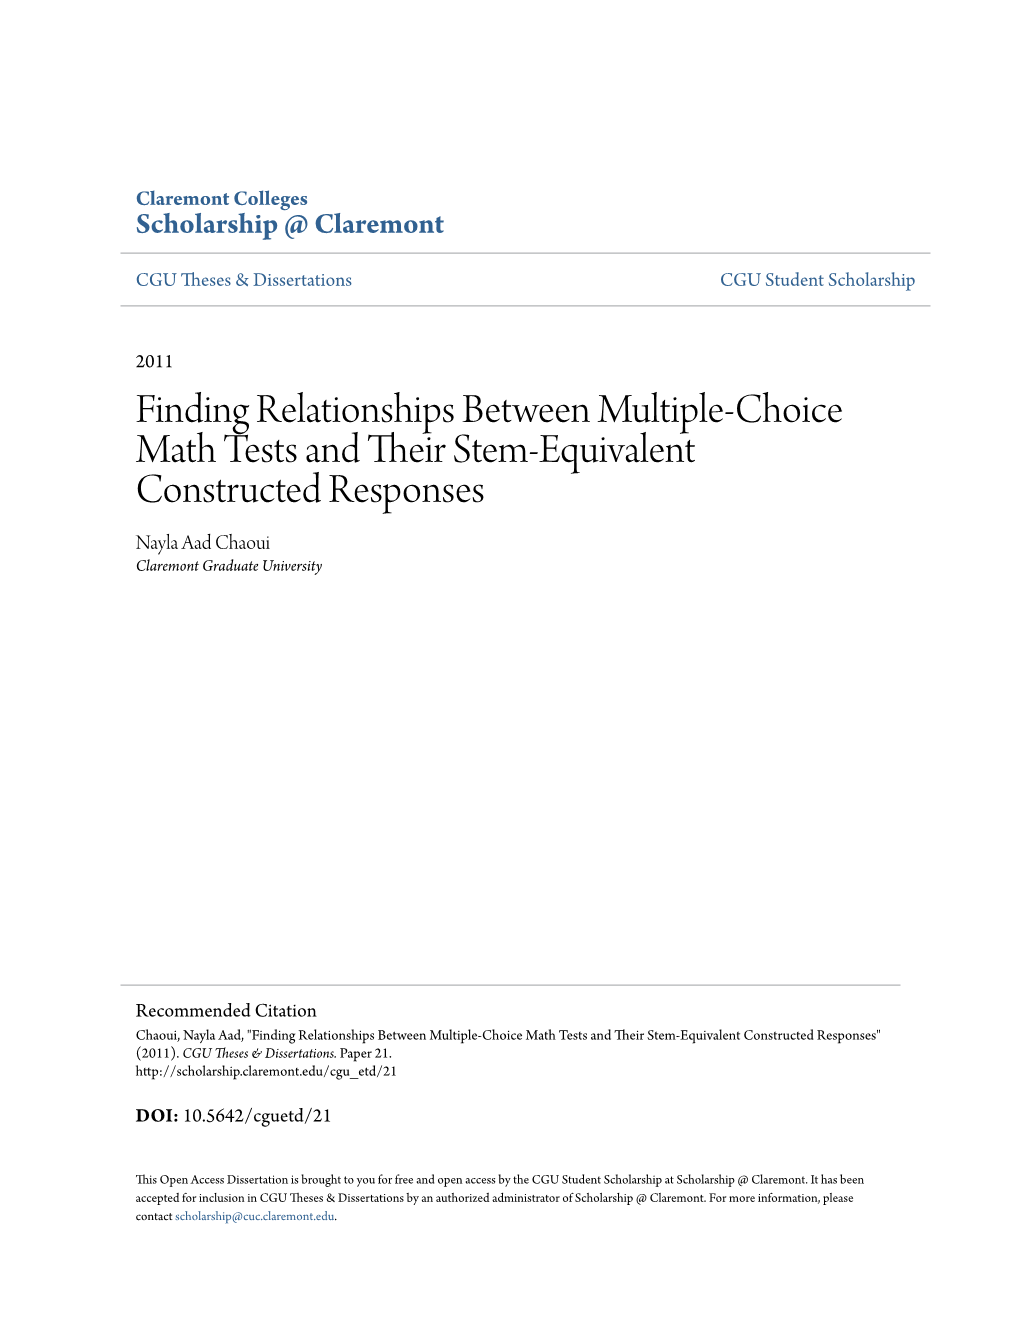 Finding Relationships Between Multiple-Choice Math Tests and Their Ts Em-Equivalent Constructed Responses Nayla Aad Chaoui Claremont Graduate University